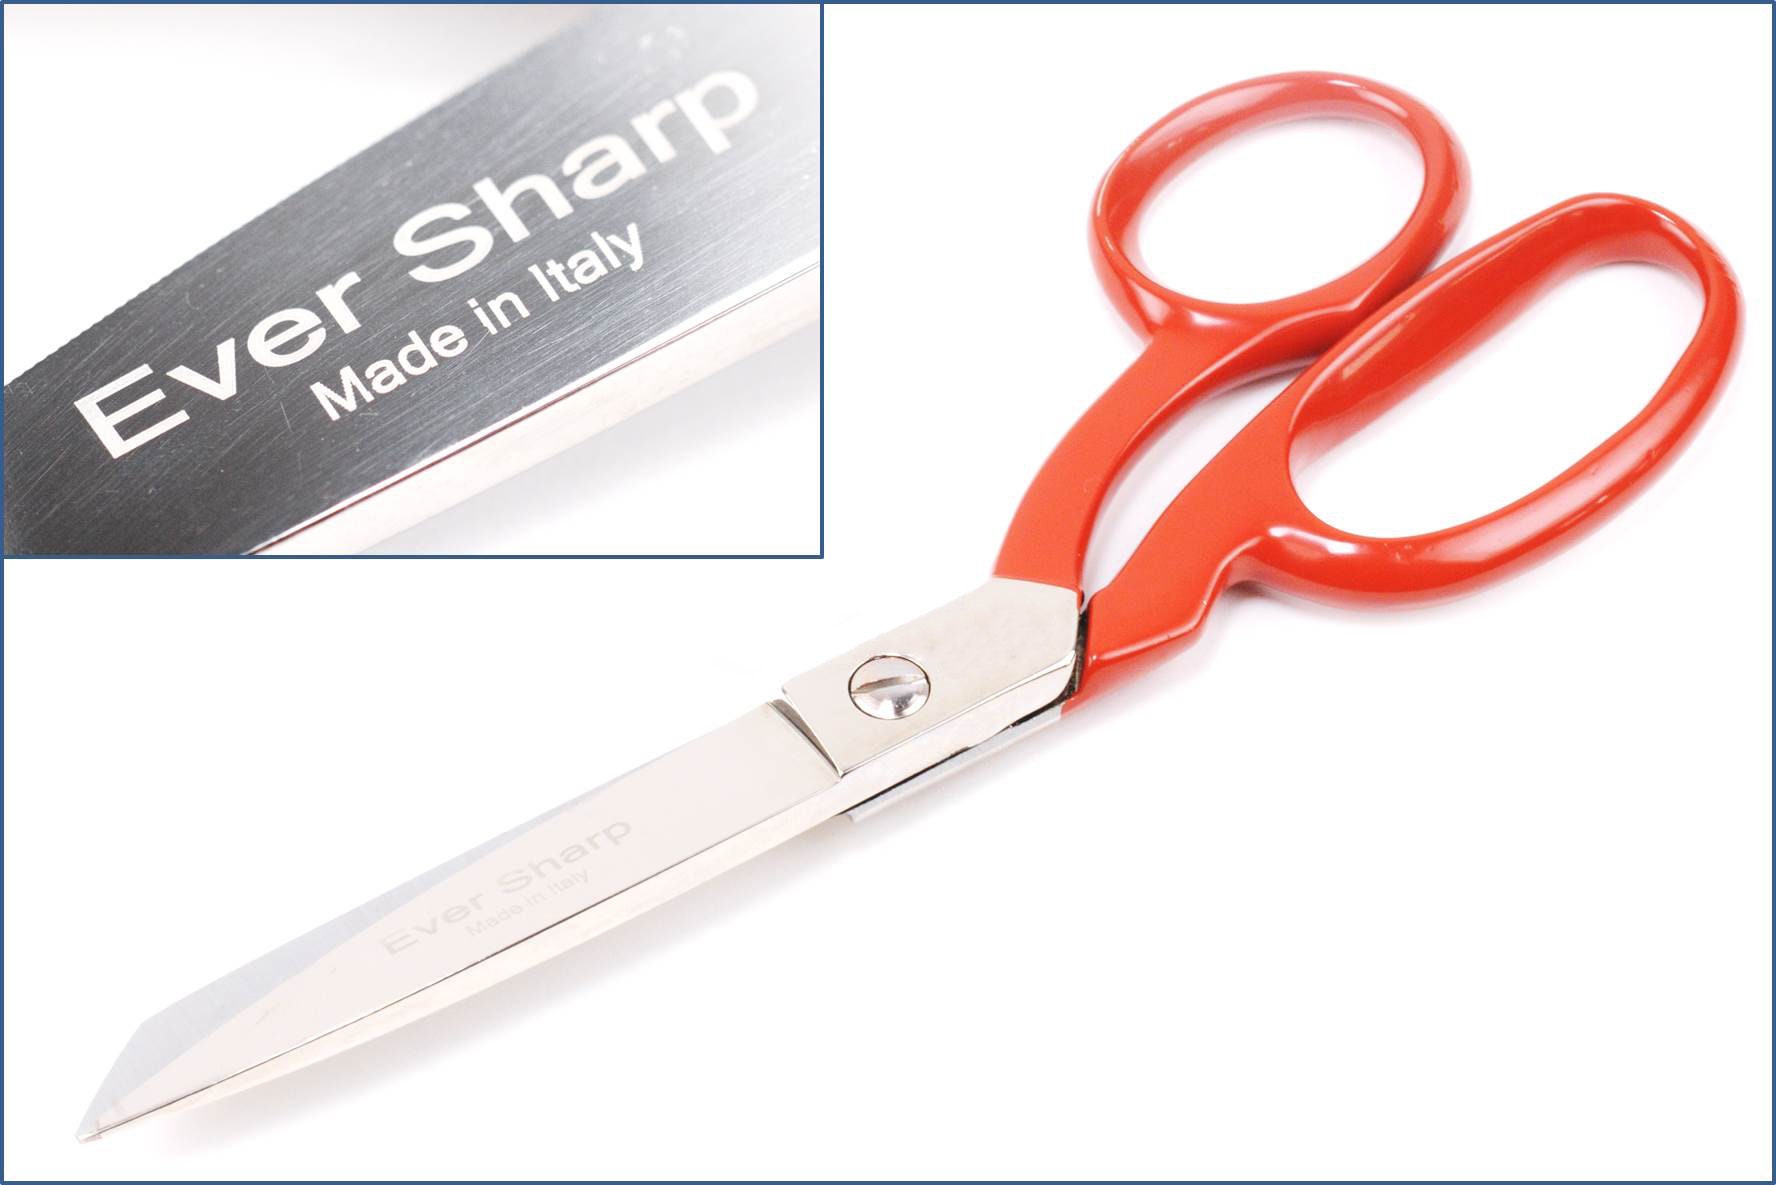 Kai 5150 6 Rag Quilt Scissor - Brand New with a Free Sharpening Certificate